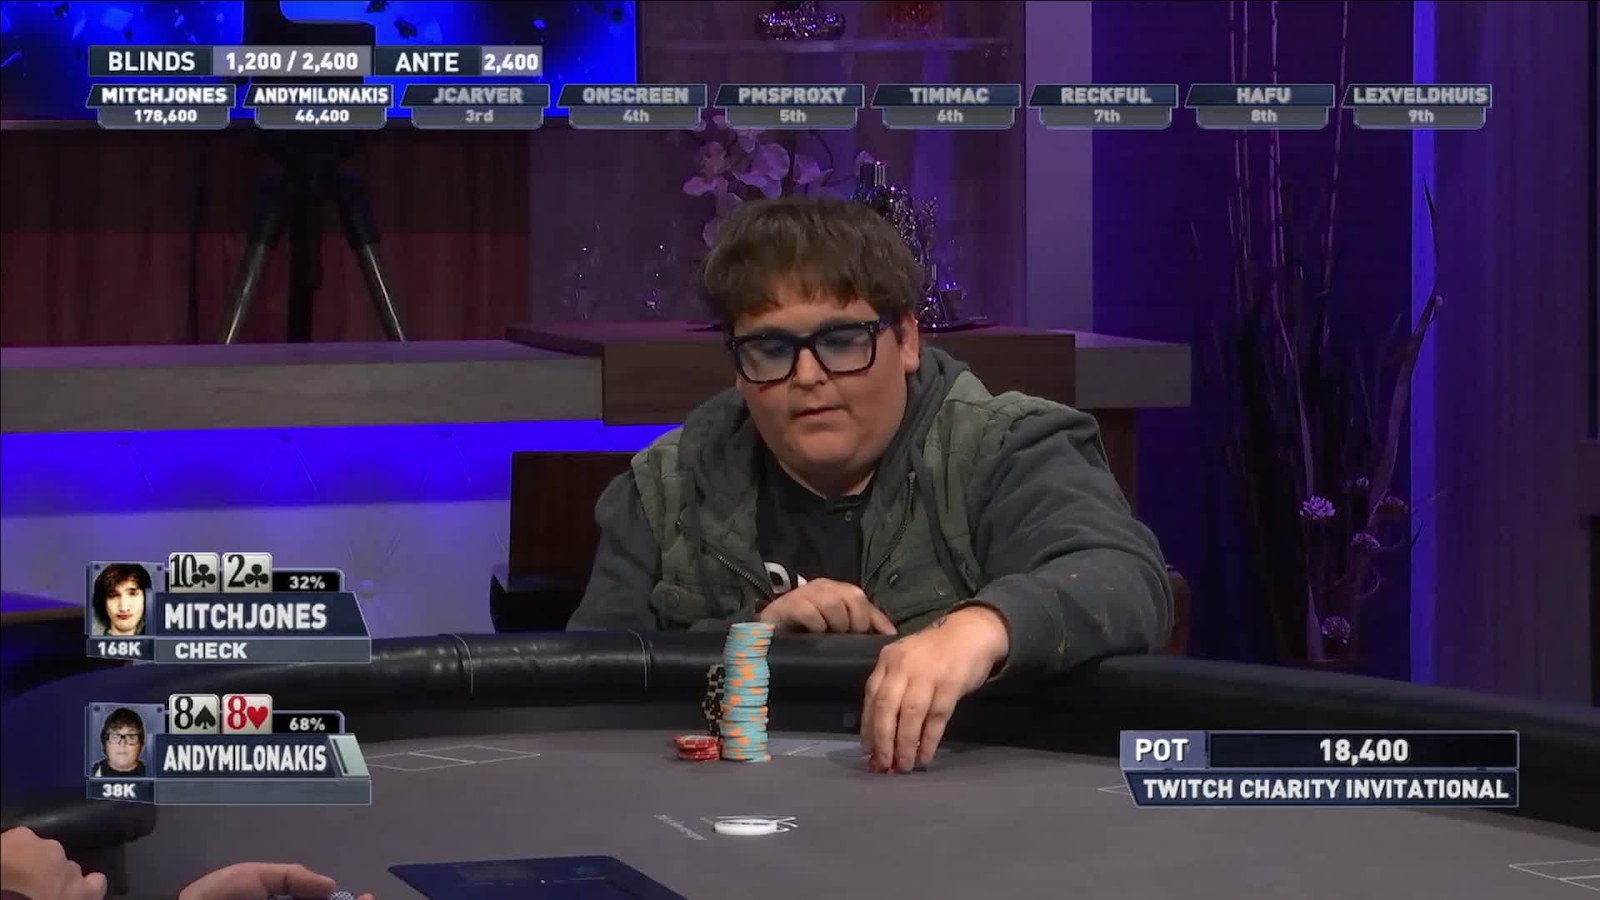 Americas Cardroom King of Poker Twitch.